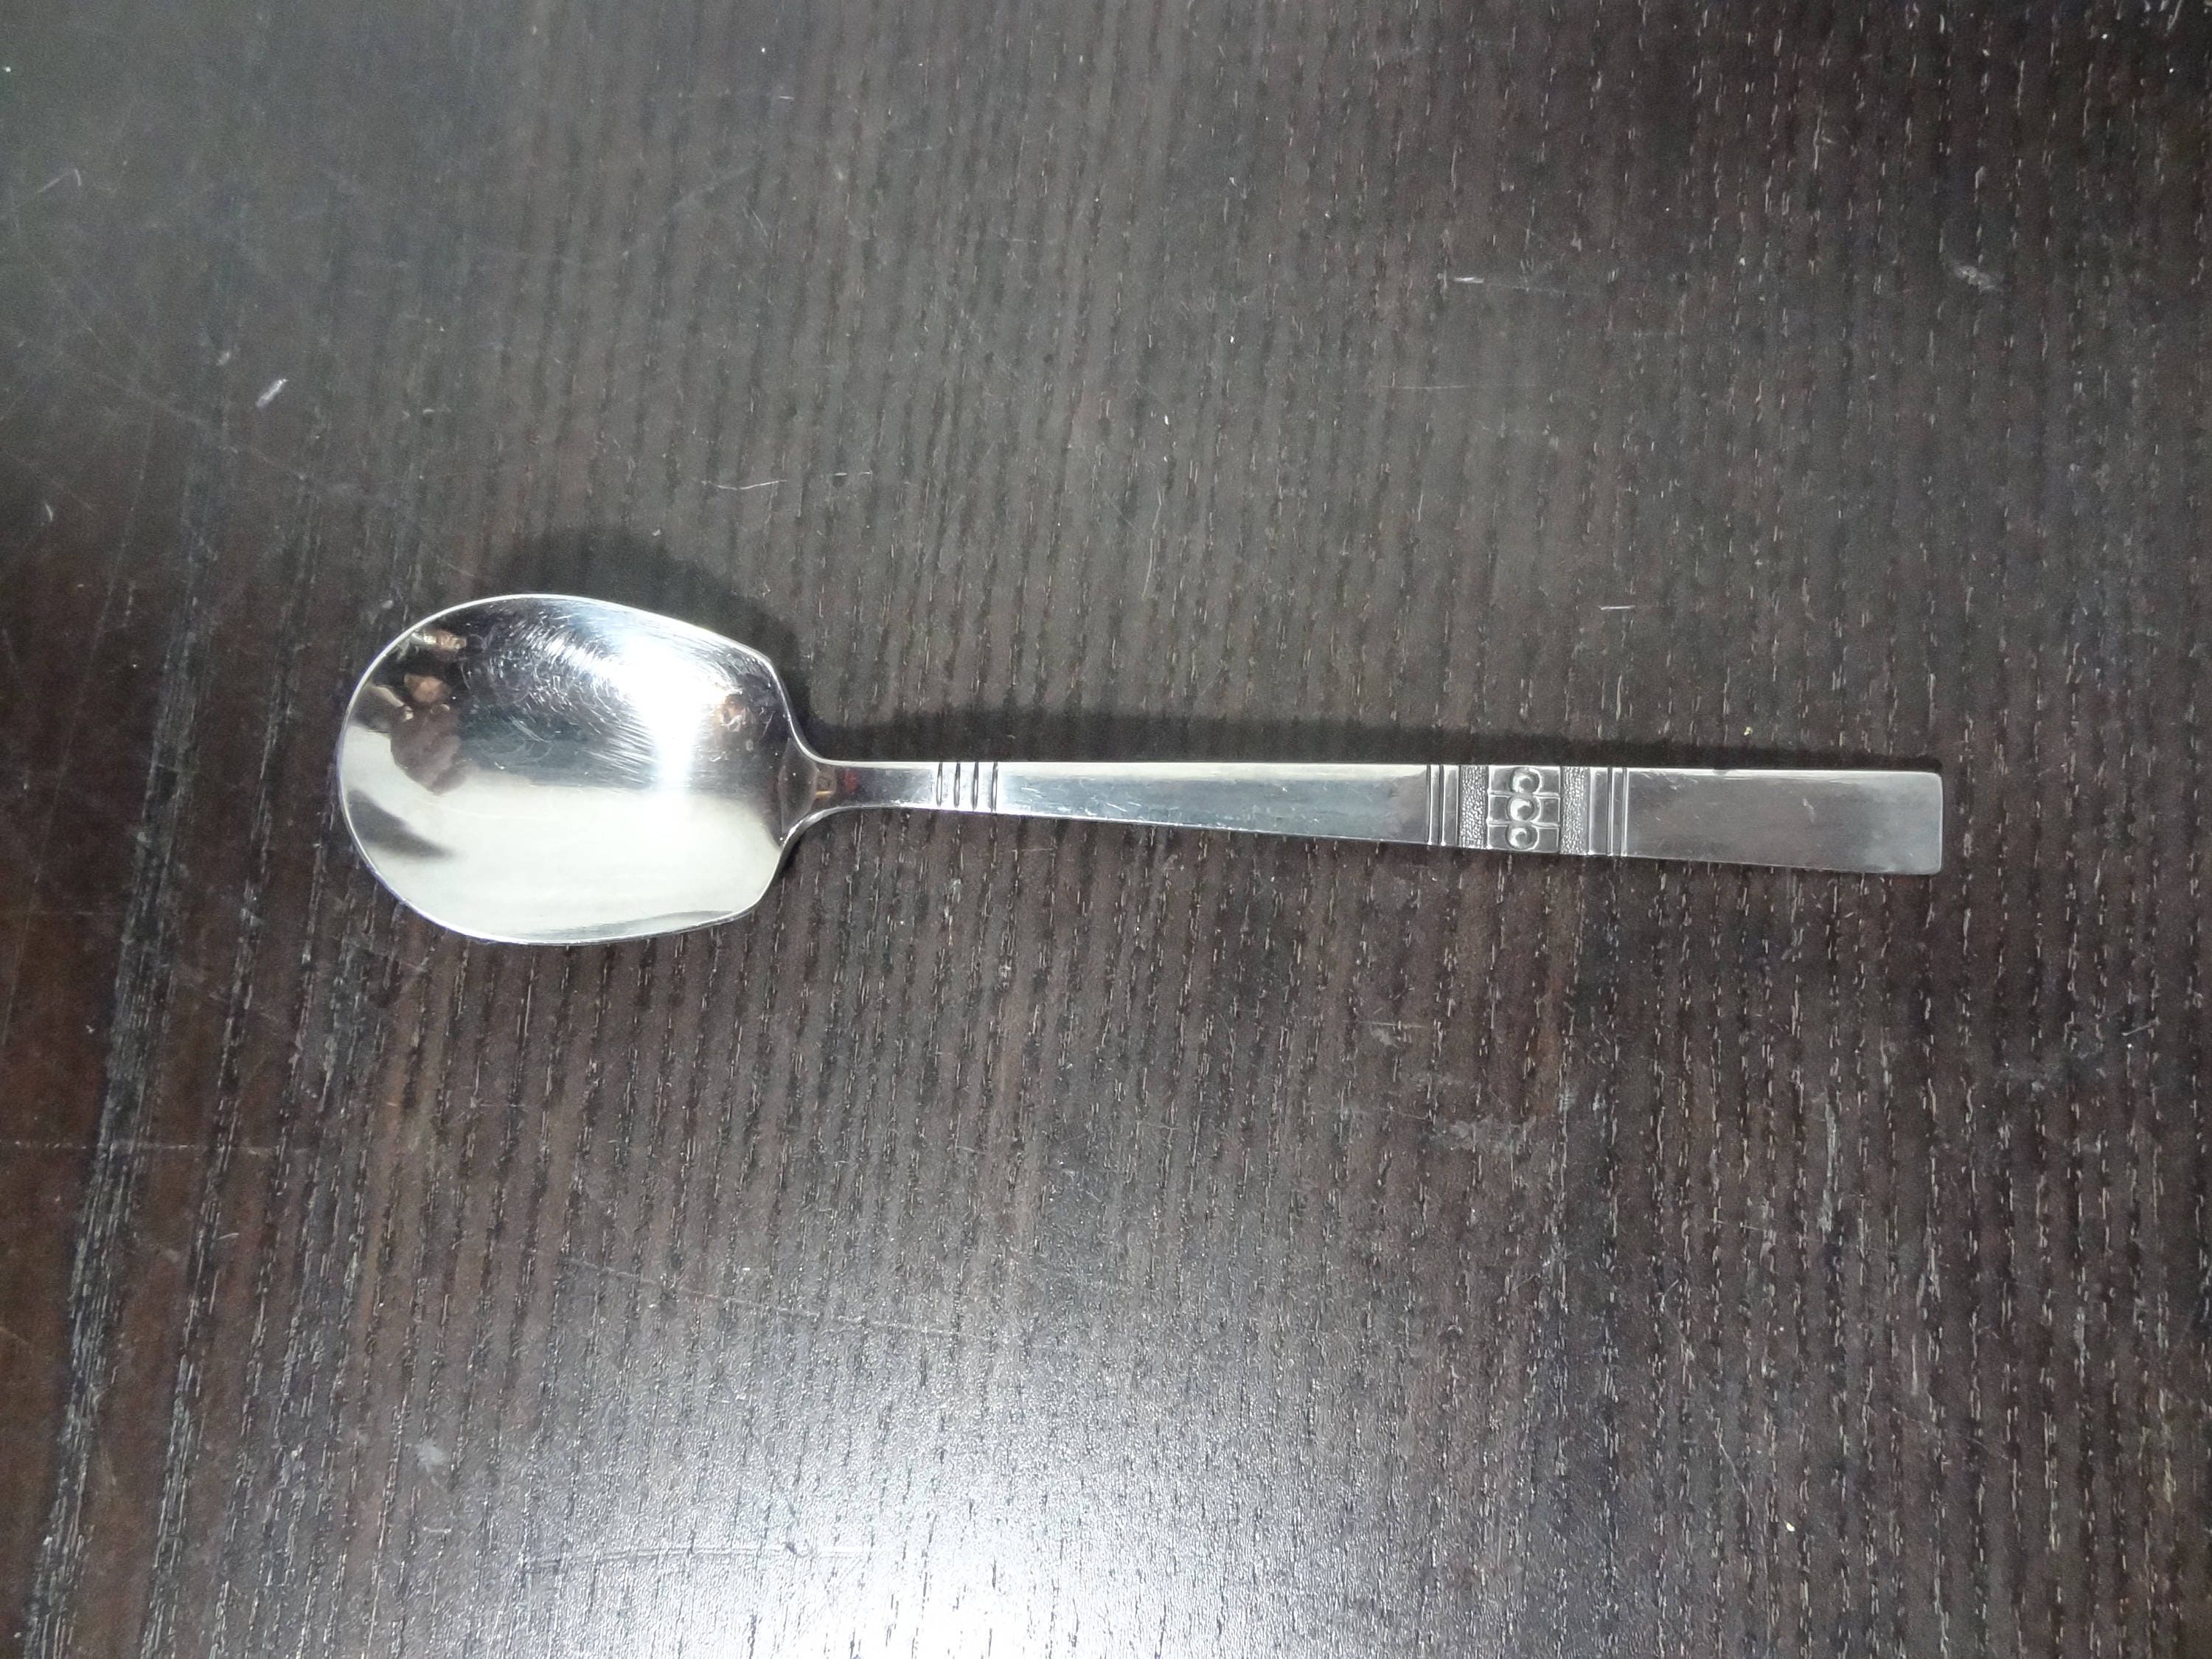 Details about   OXFORD HALL STAINLESS FLATWARE TEMPLAR PATTERN 4 TEASPOONS 6 1/4" VGC 